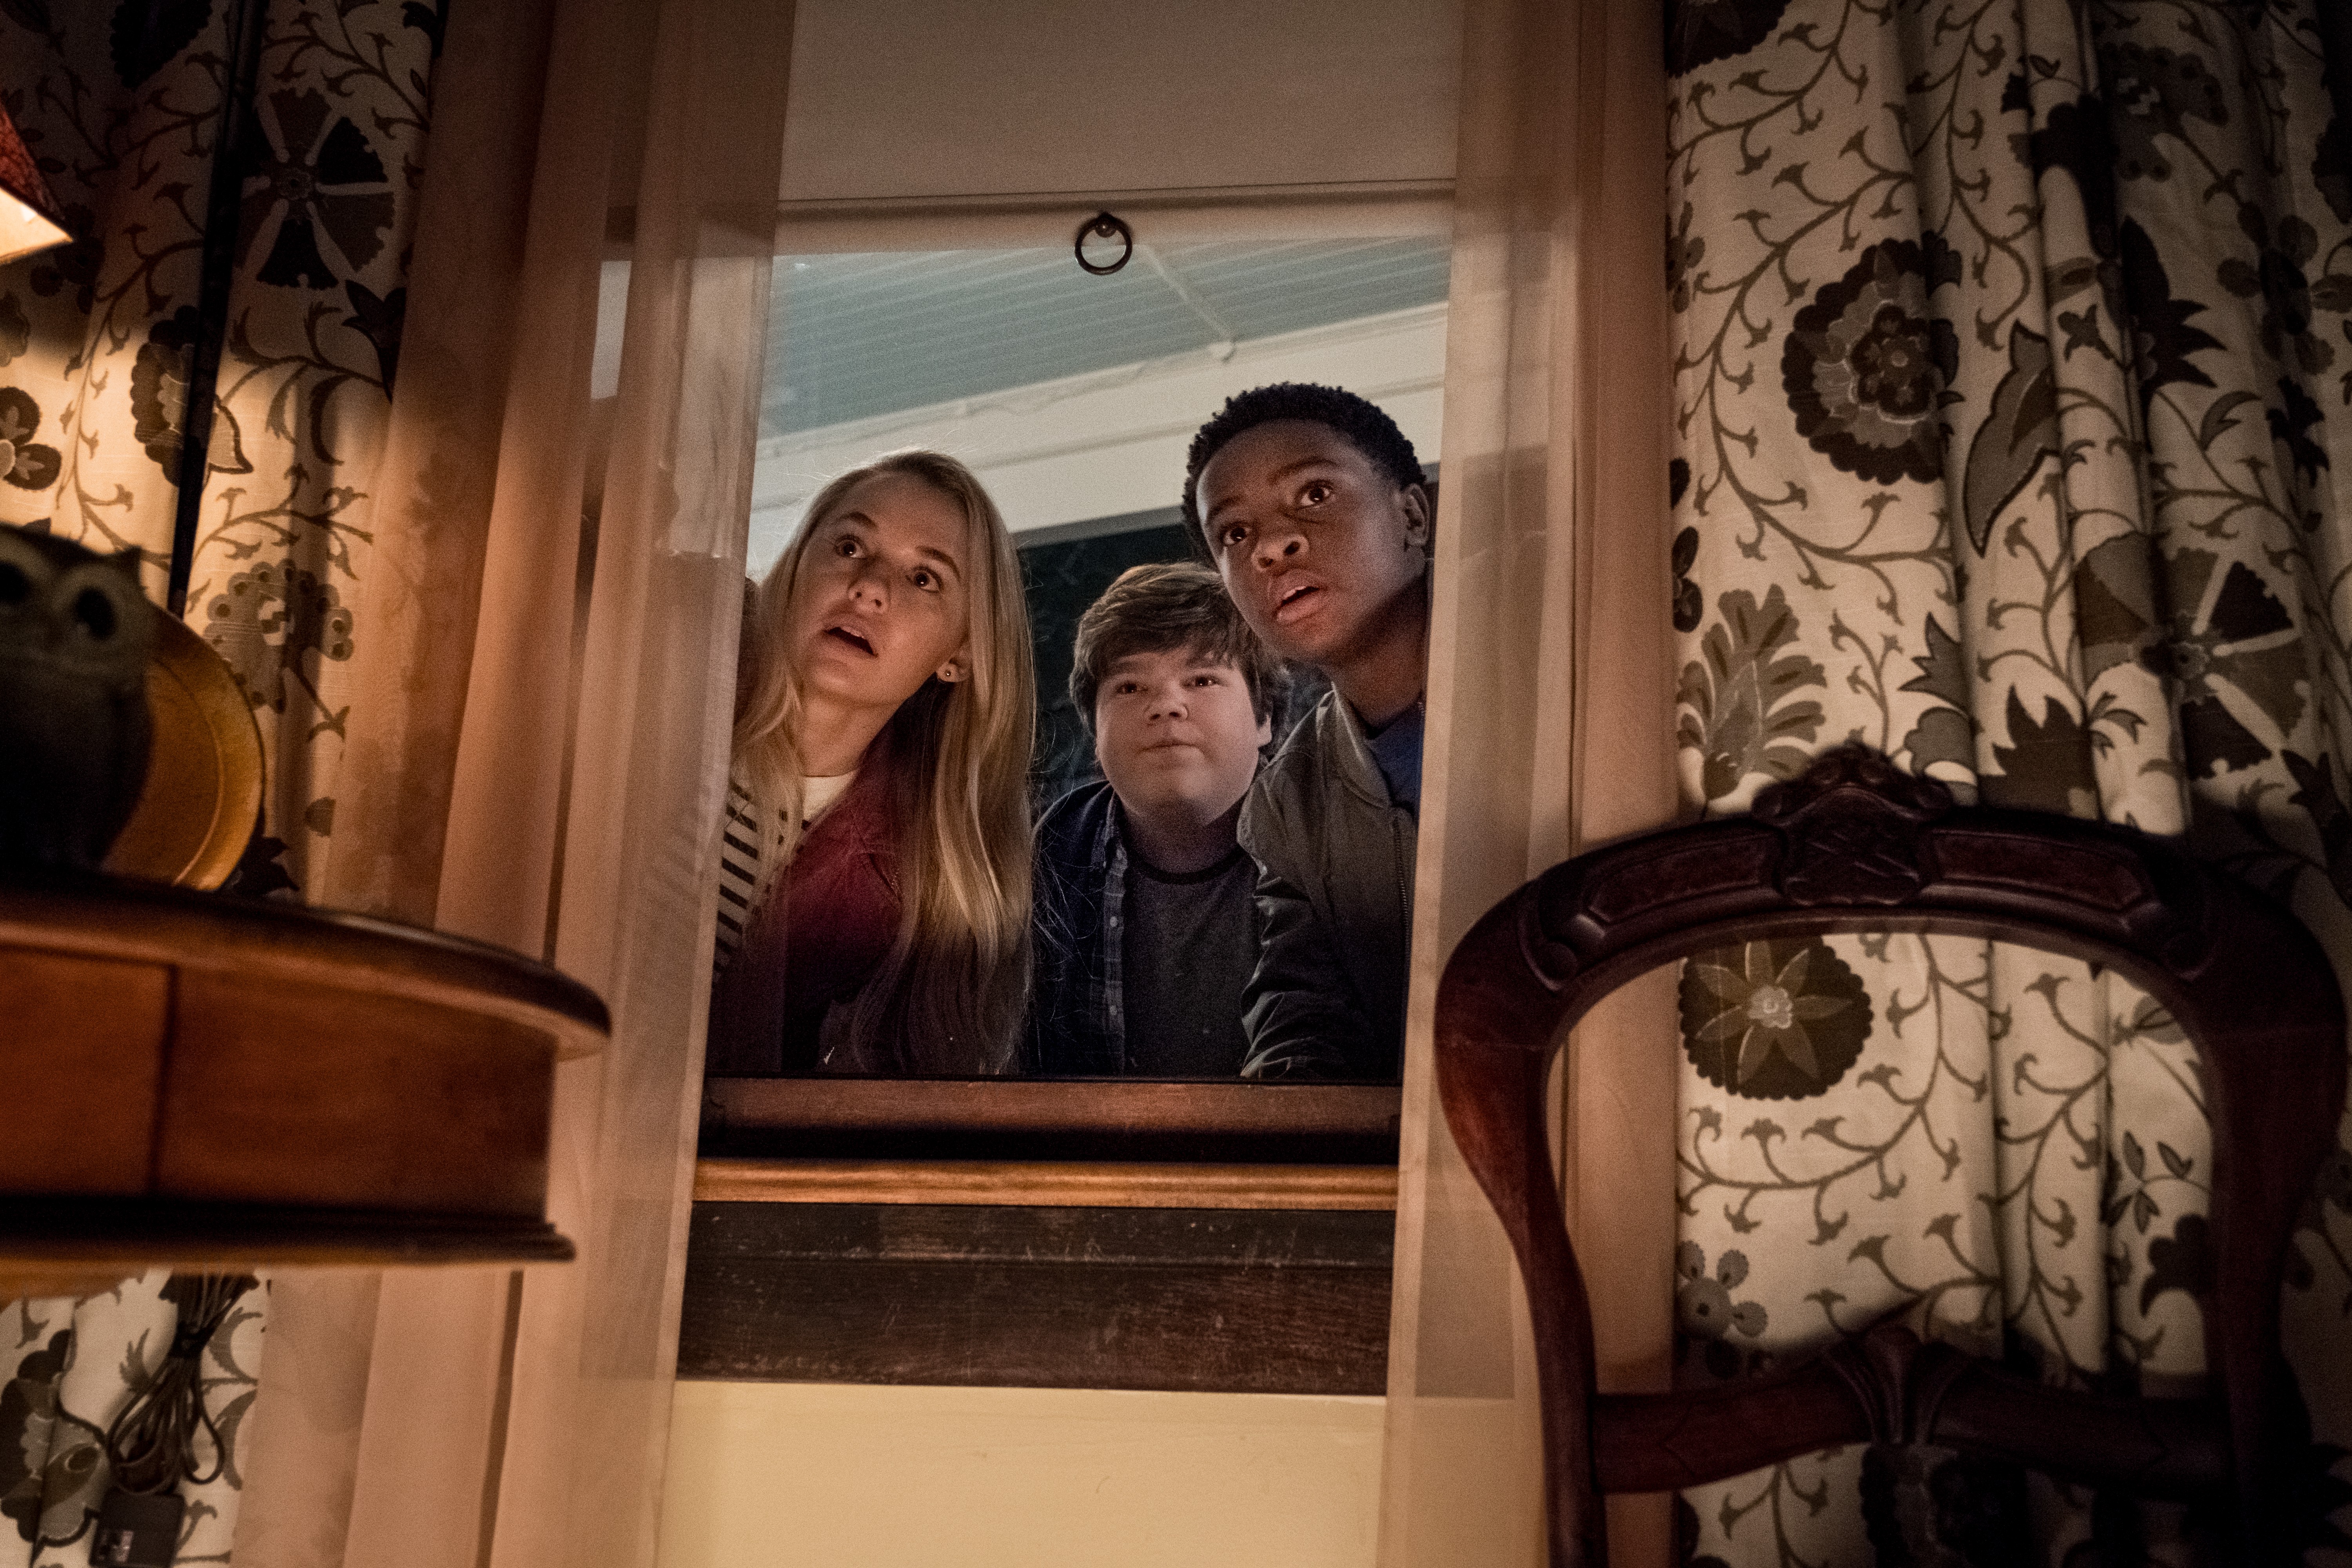 Madison Iseman (Sarah) Jeremy Ray Taylor (Sonny) Caleel Harris (Sam): EXT Tommy's House: The kids try to get into Tommy's house to find the book. Tommy's nana is asleep on the couch"